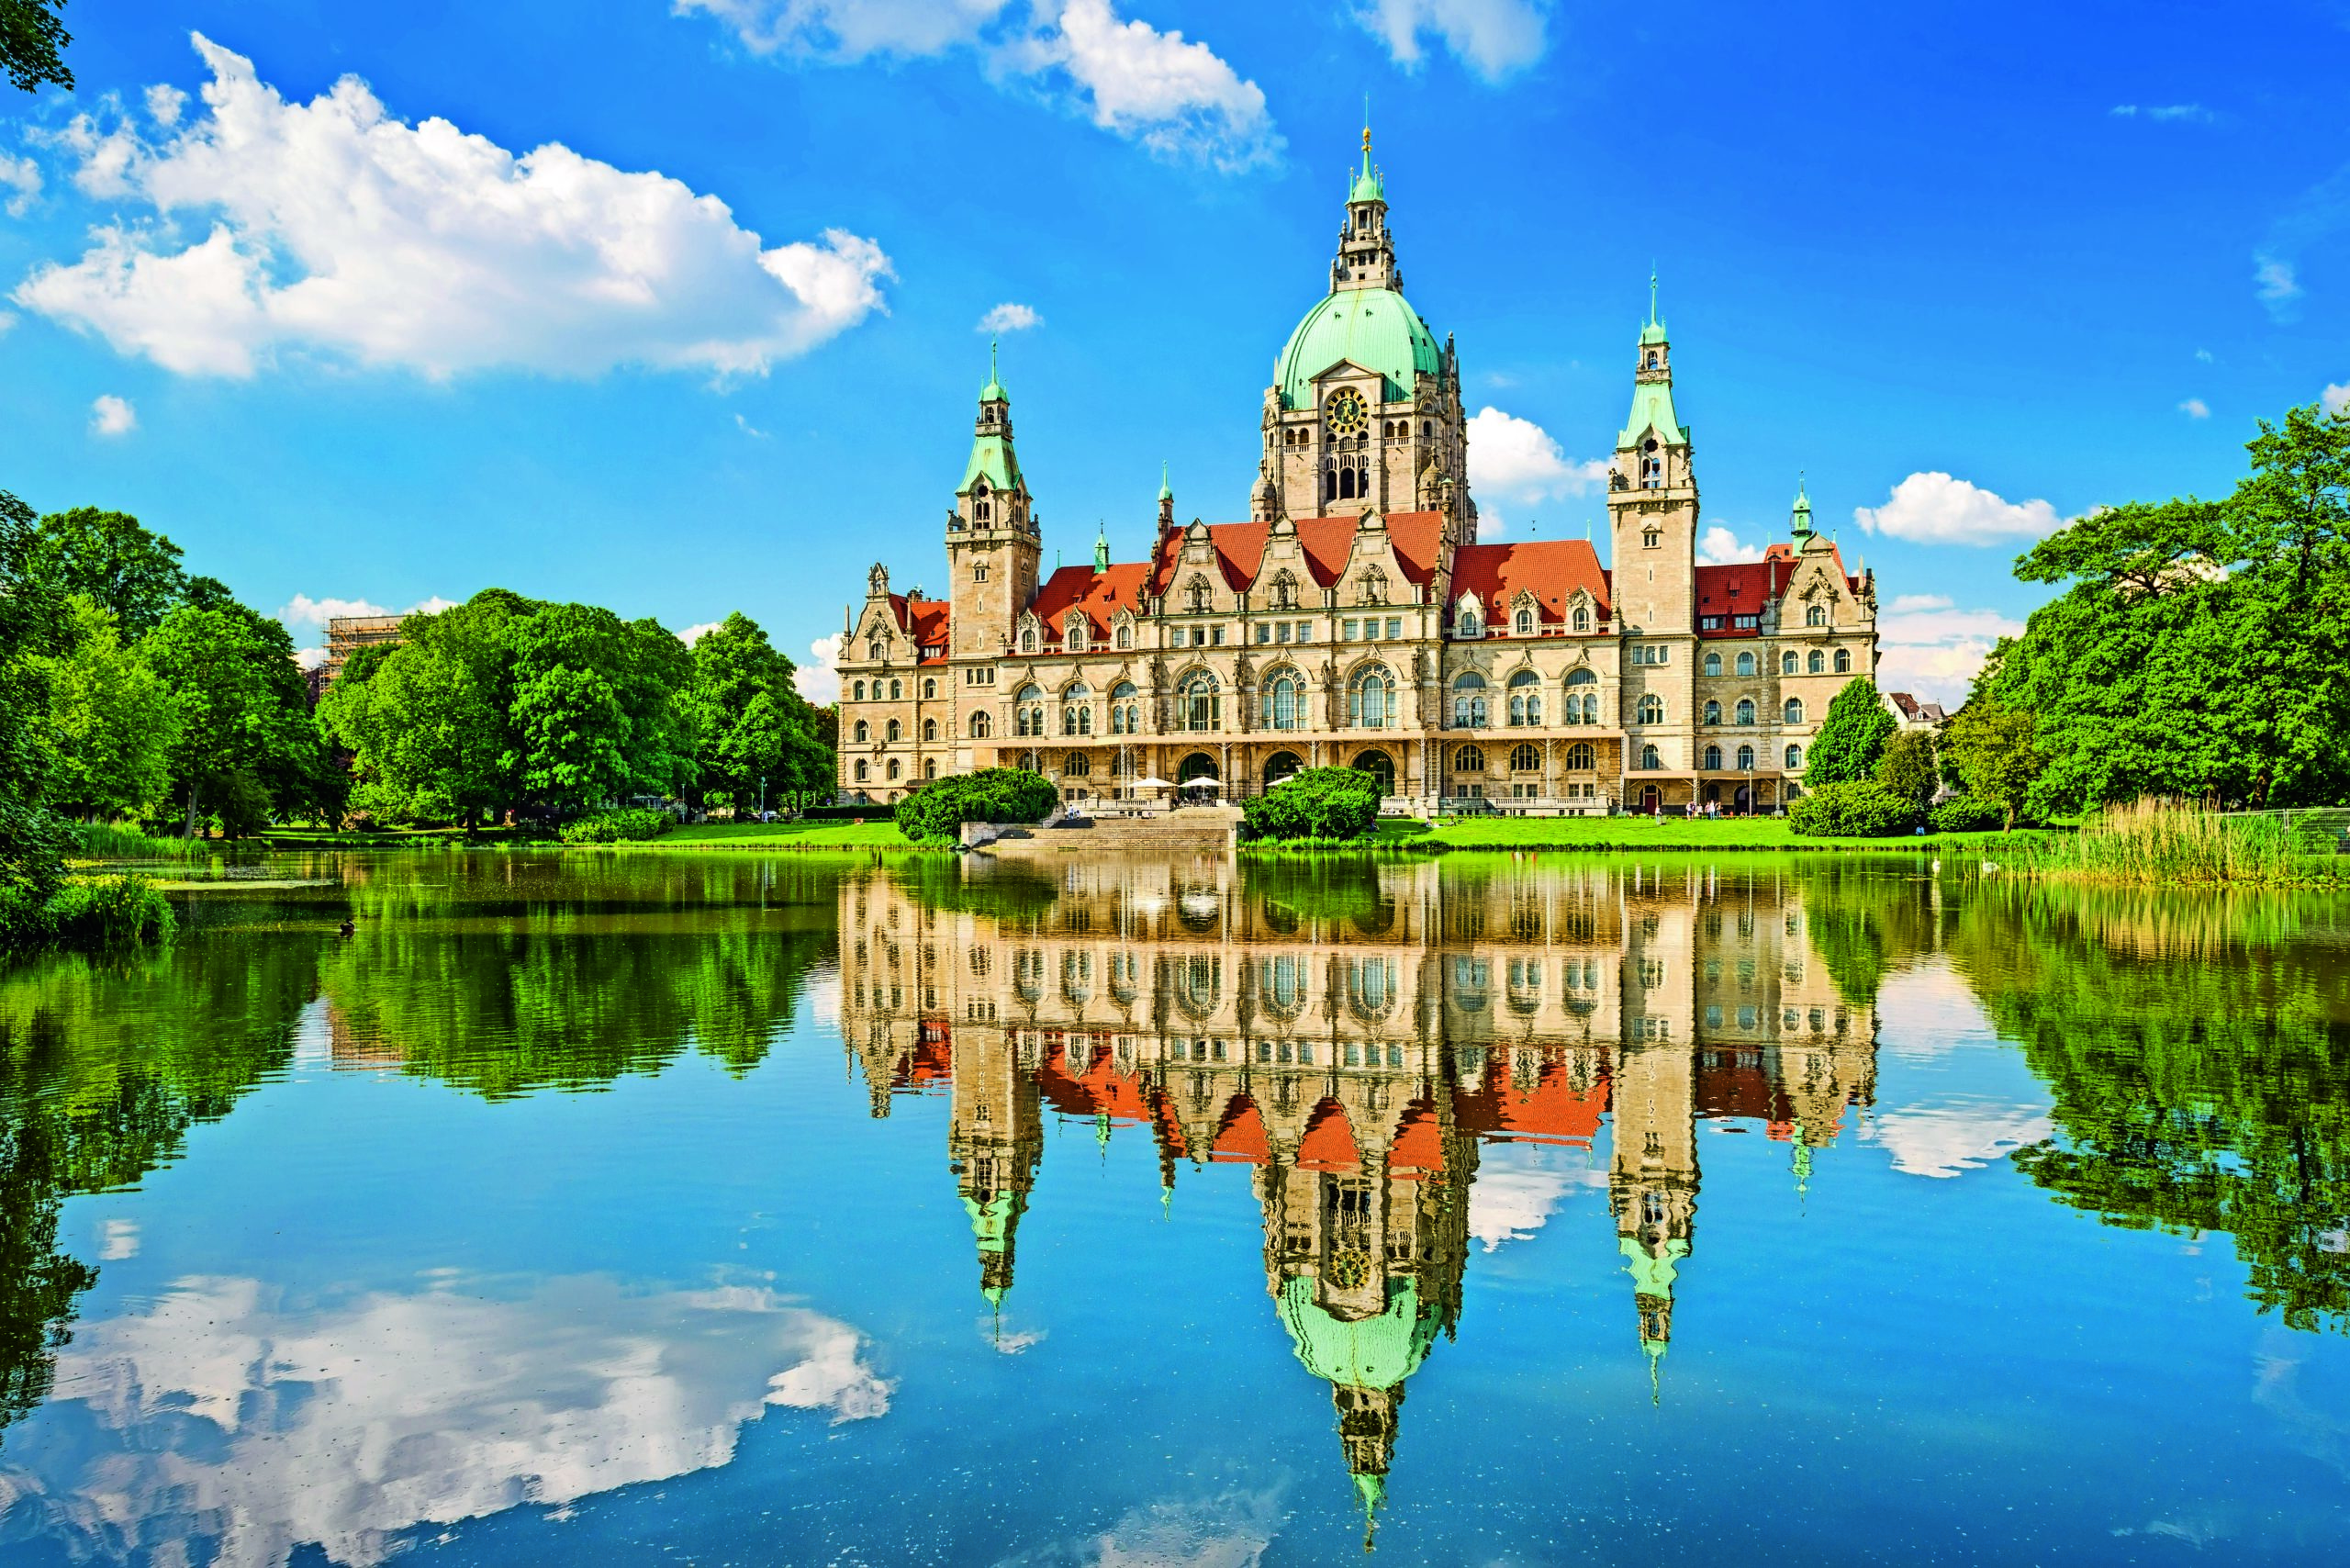 City Hall of Hannover, Germany with reflection in a lake